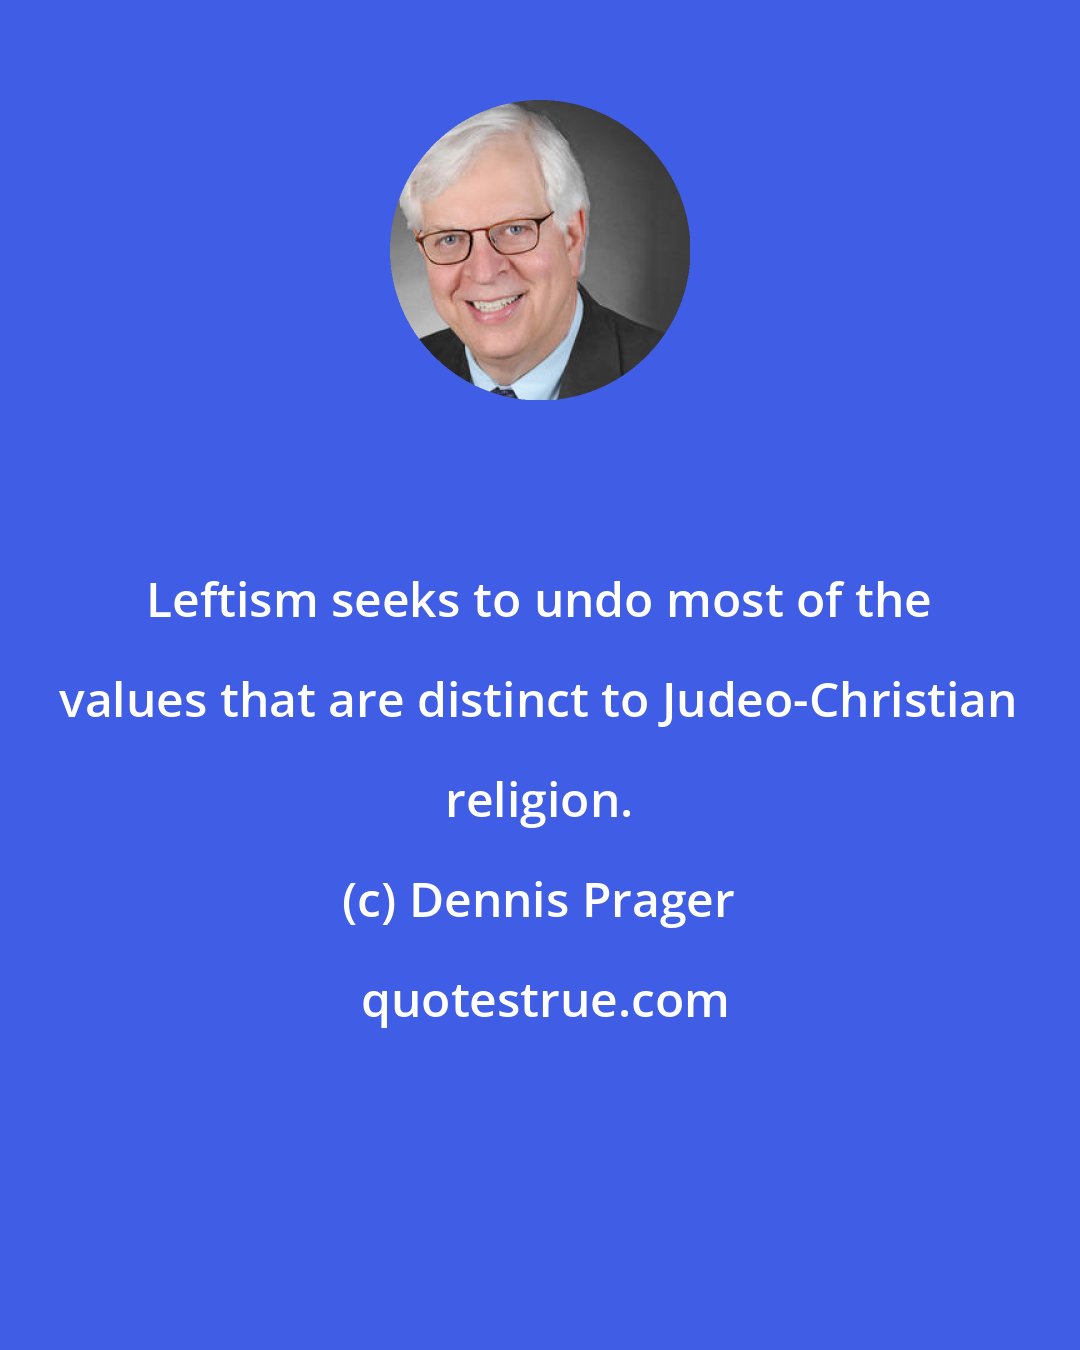 Dennis Prager: Leftism seeks to undo most of the values that are distinct to Judeo-Christian religion.